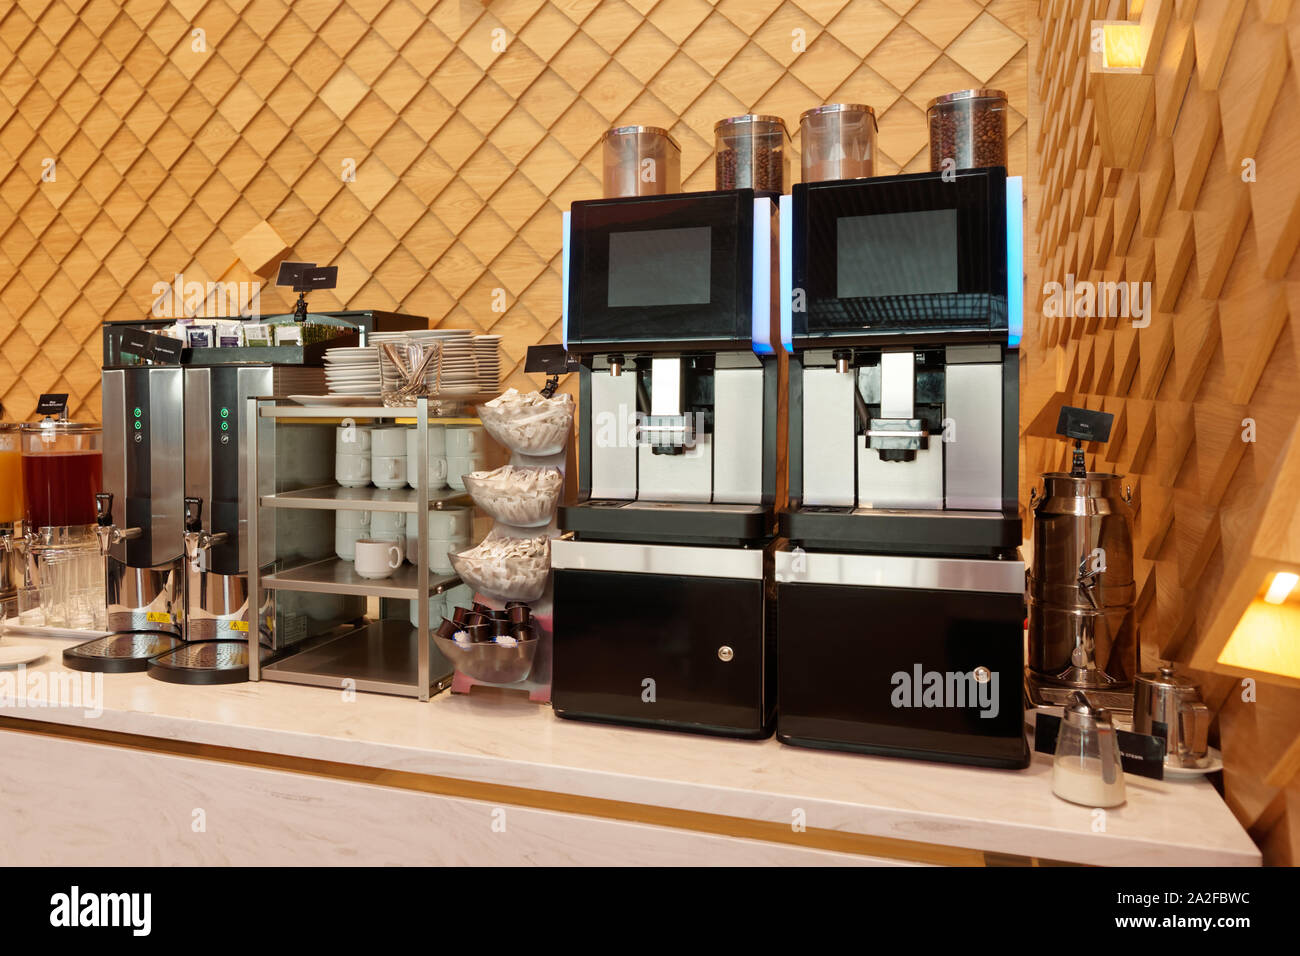 https://c8.alamy.com/comp/2A2FBWC/super-automatic-coffee-machines-and-hot-water-dispensers-in-an-airport-lounge-2A2FBWC.jpg